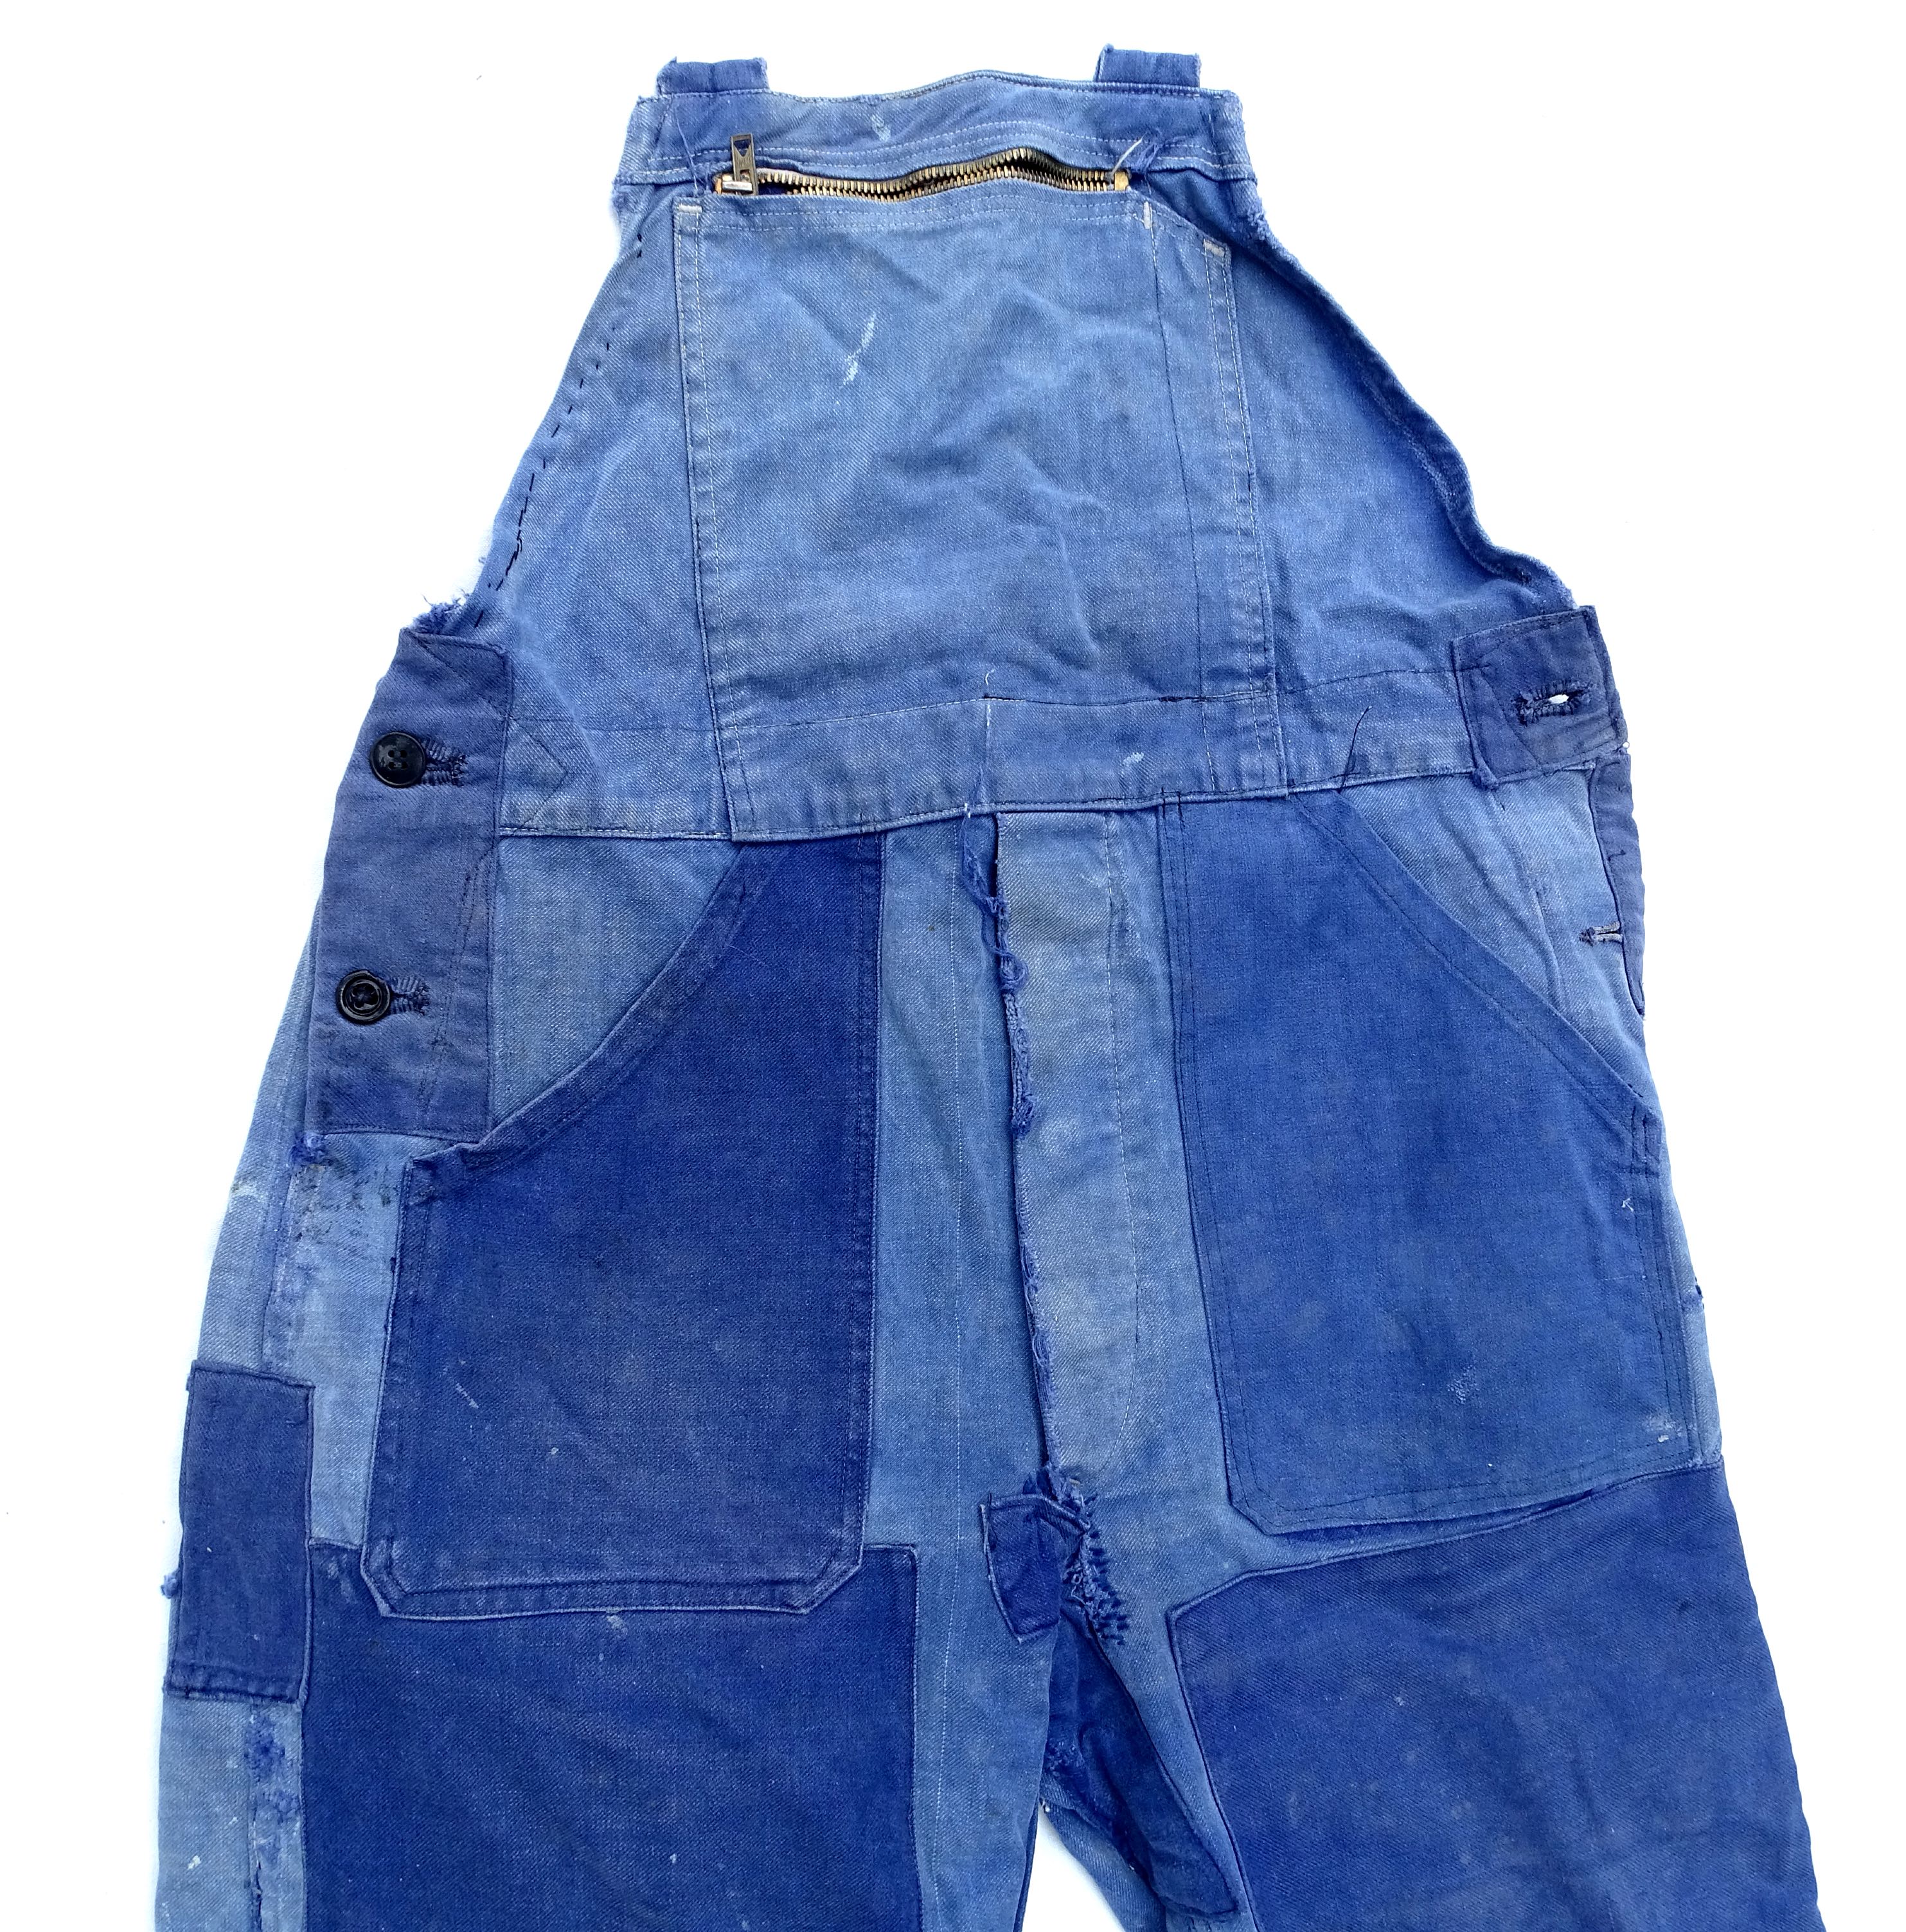 French work overalls  Blue canvas, patched